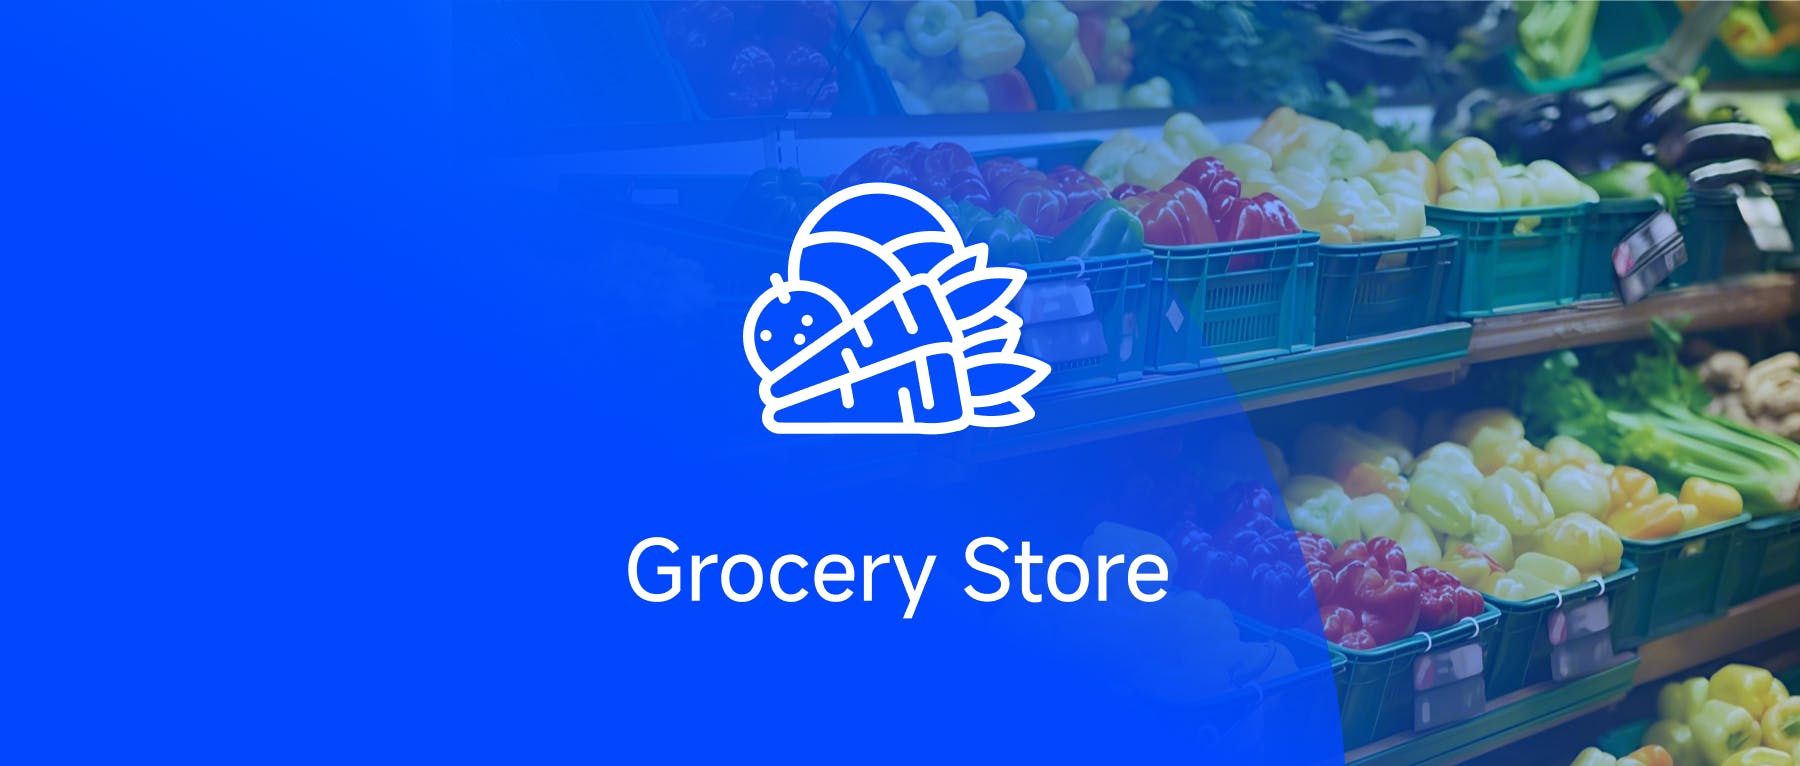 Cross-Cluster Replication for read-write separation: story of a grocery store